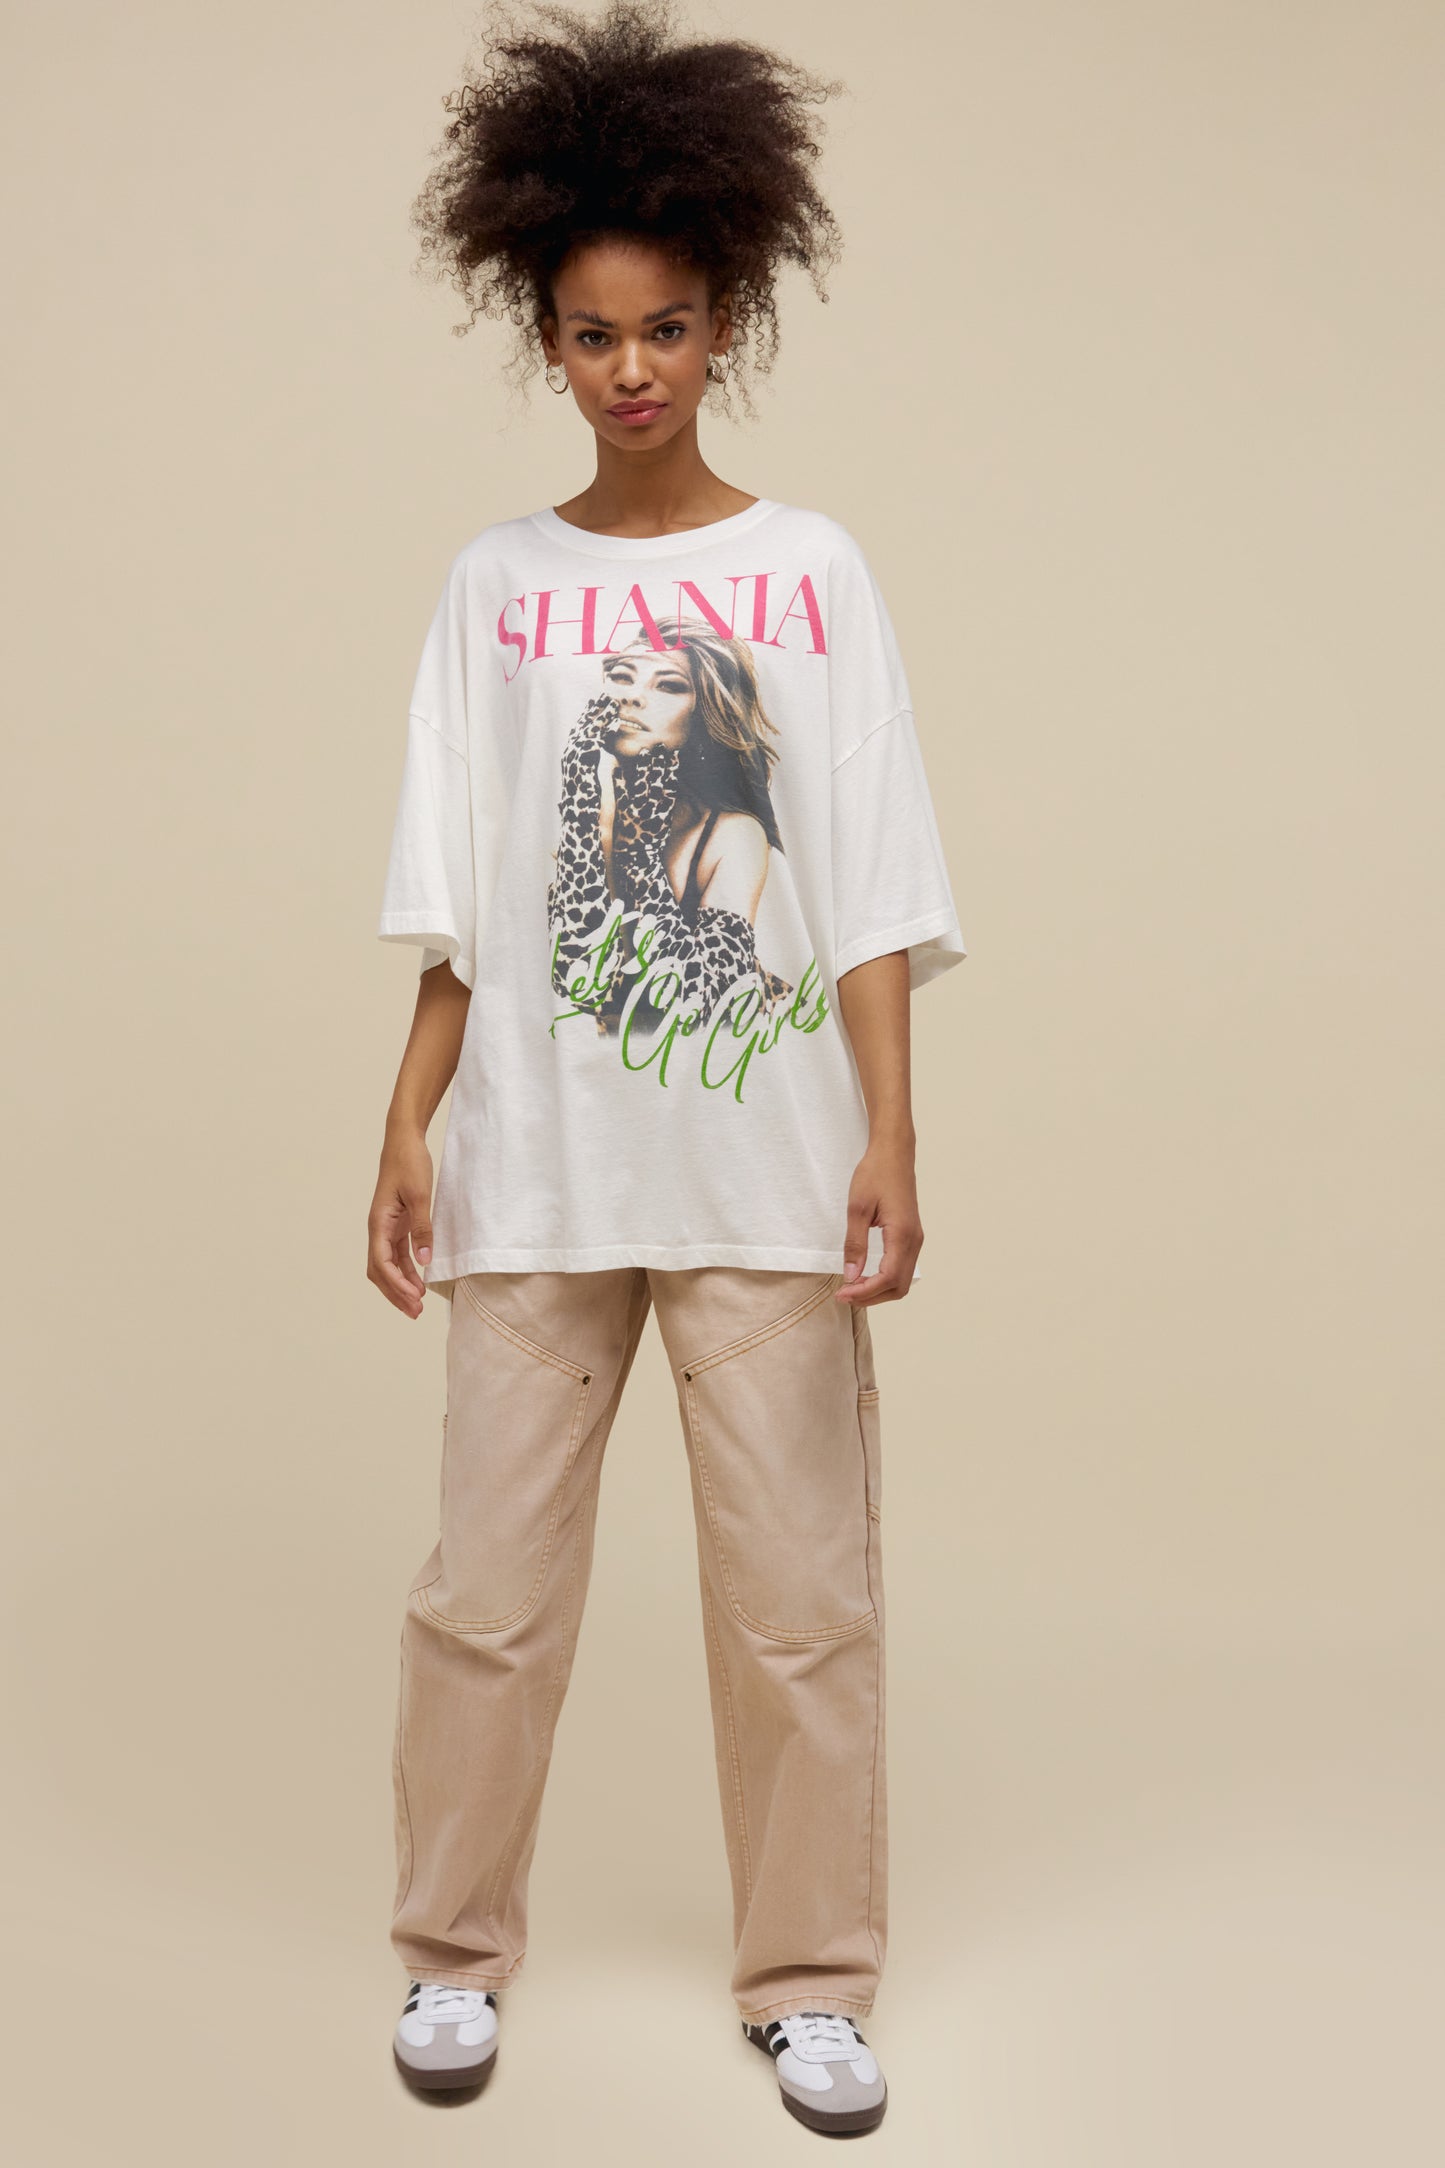 Model wearing an oversized Shania Twain 'Let's Go Girls' graphic tee in vintage white